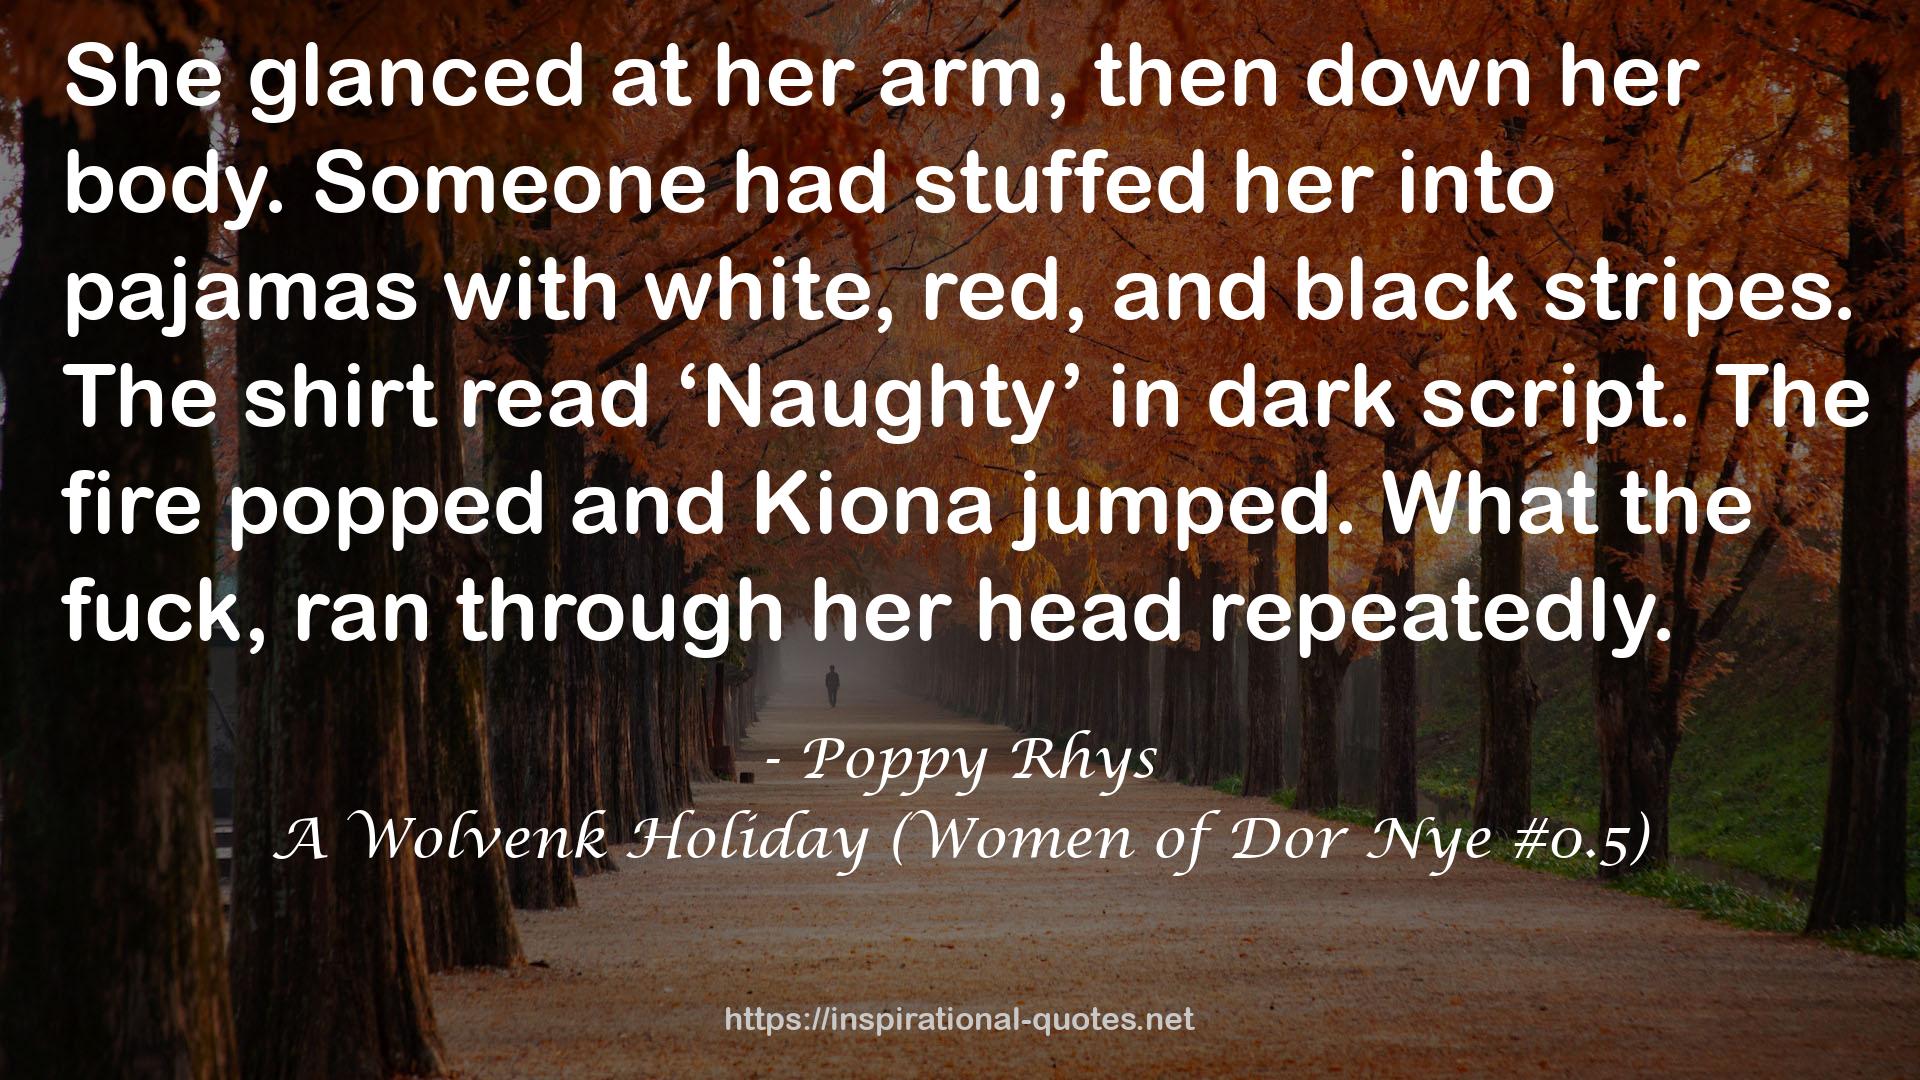 A Wolvenk Holiday (Women of Dor Nye #0.5) QUOTES